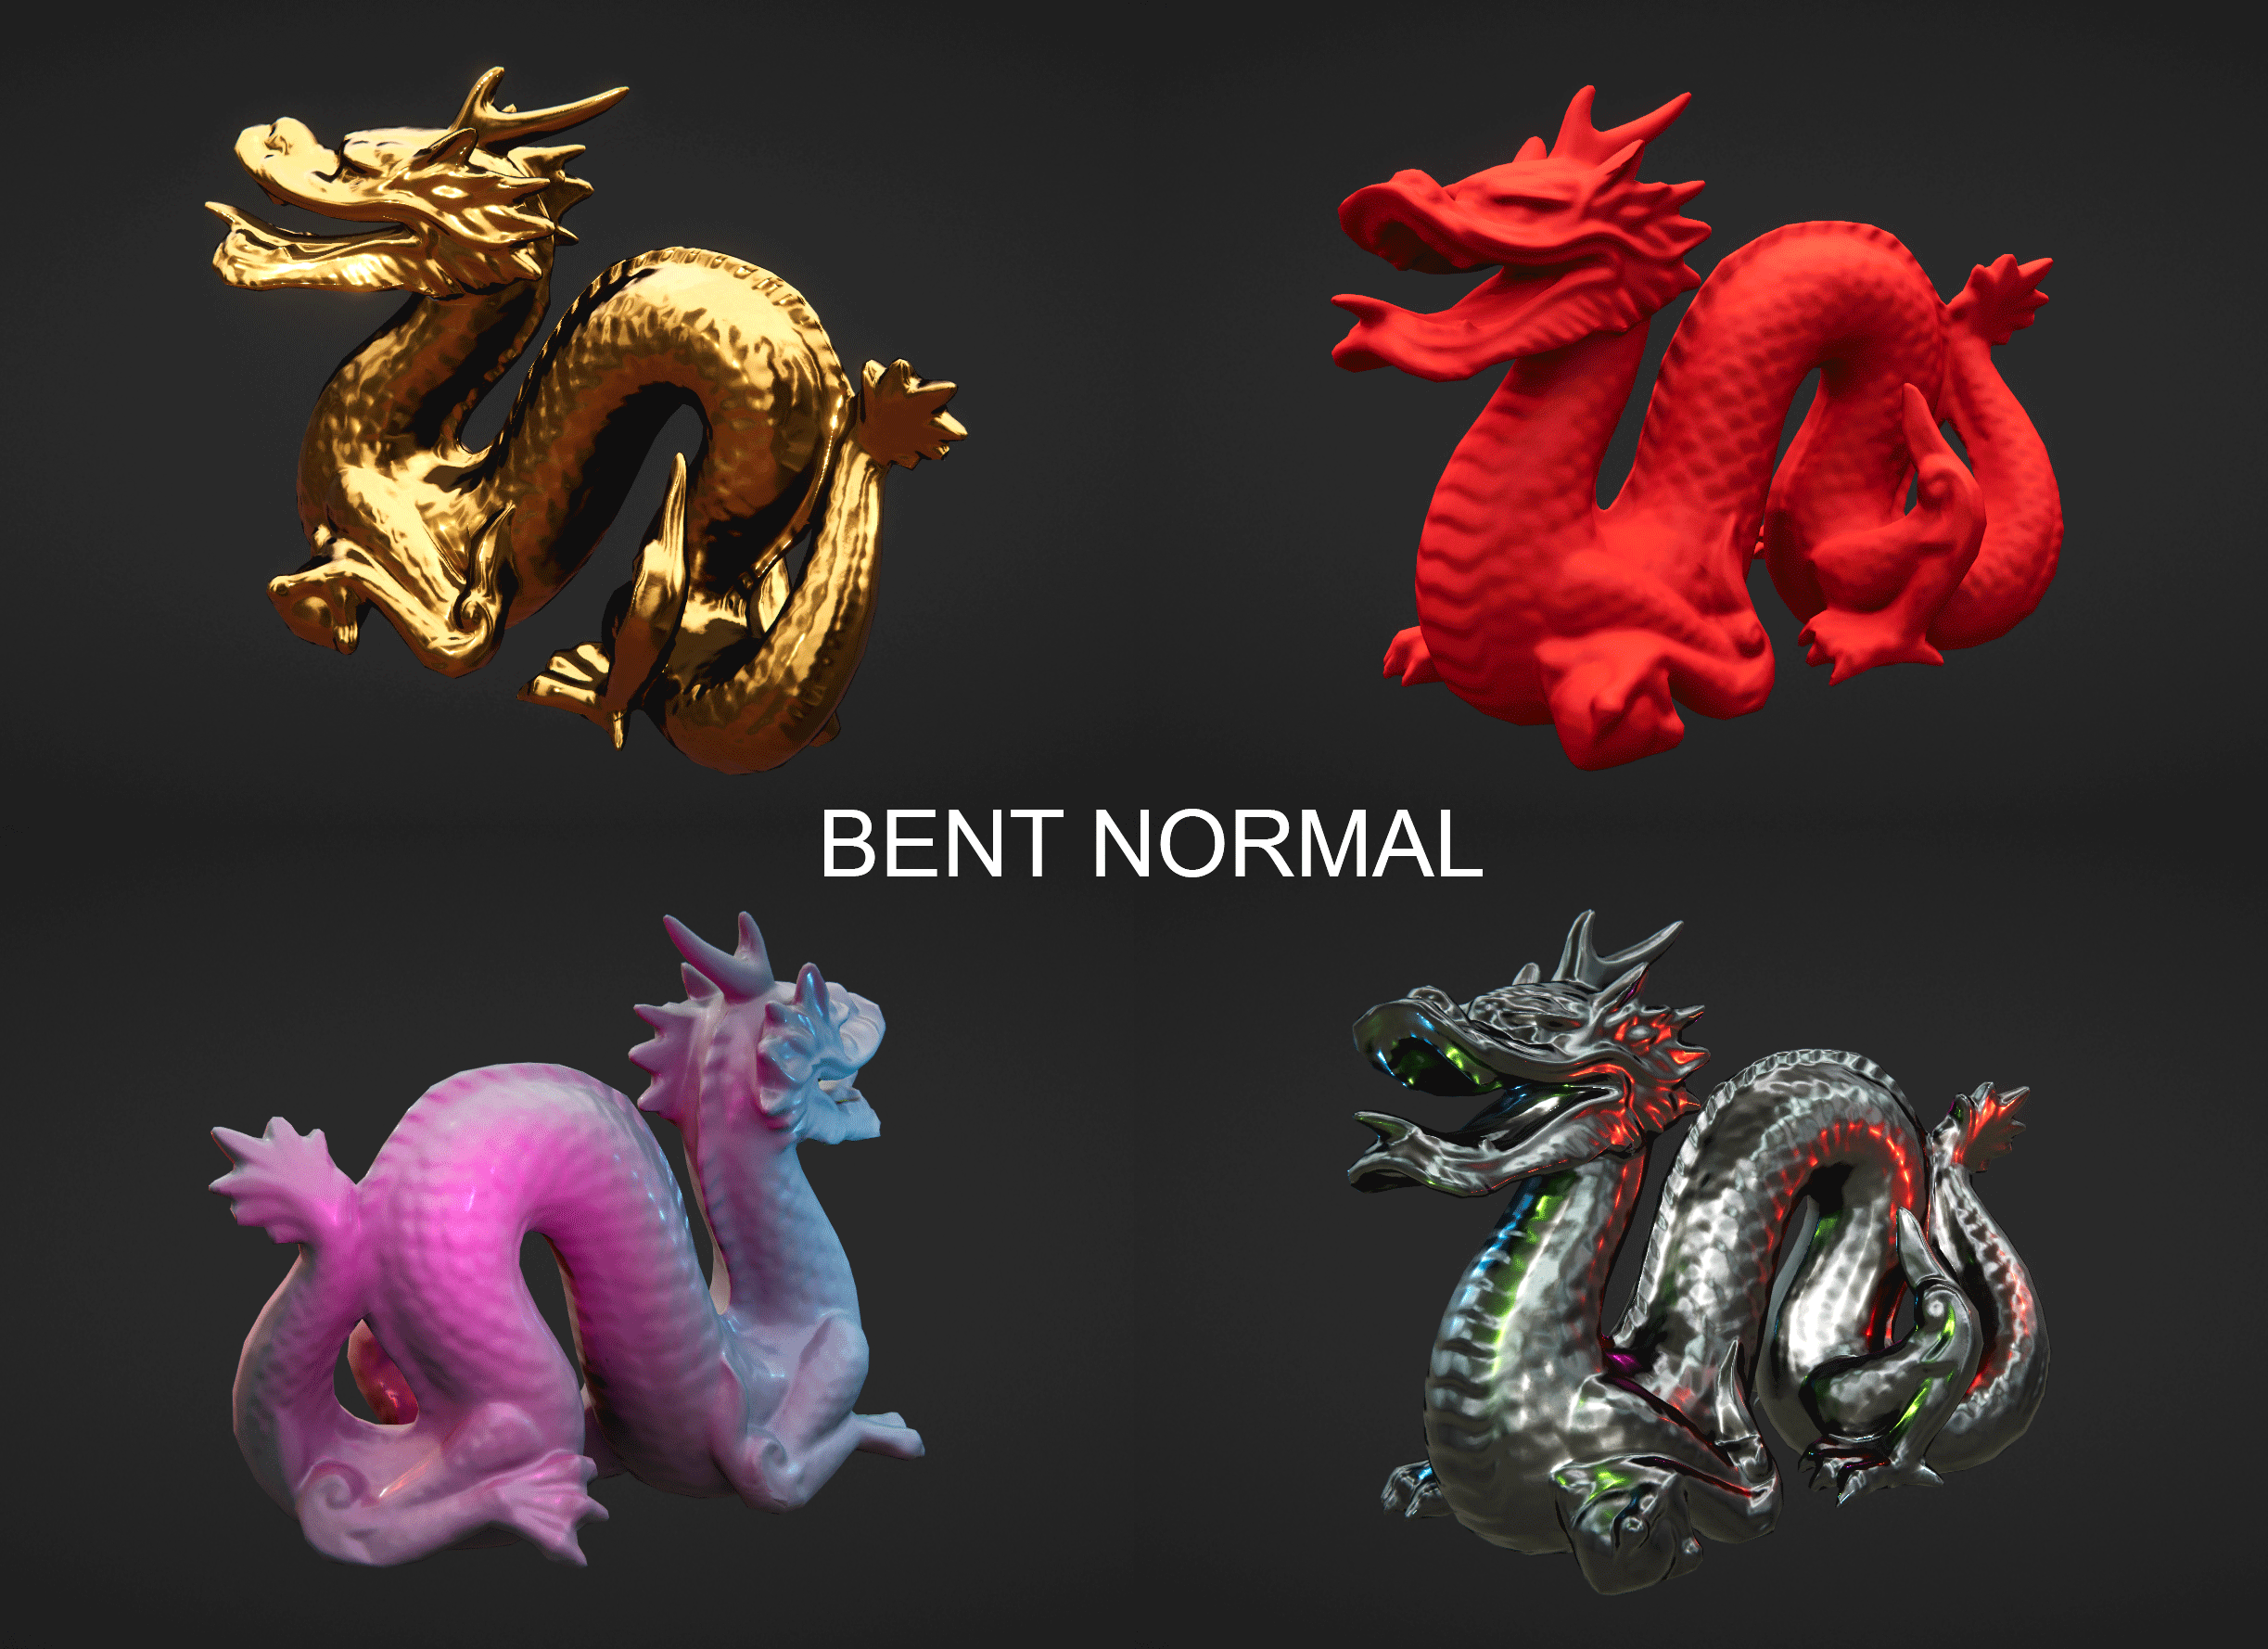 Showcasing some advanced bent normal effects